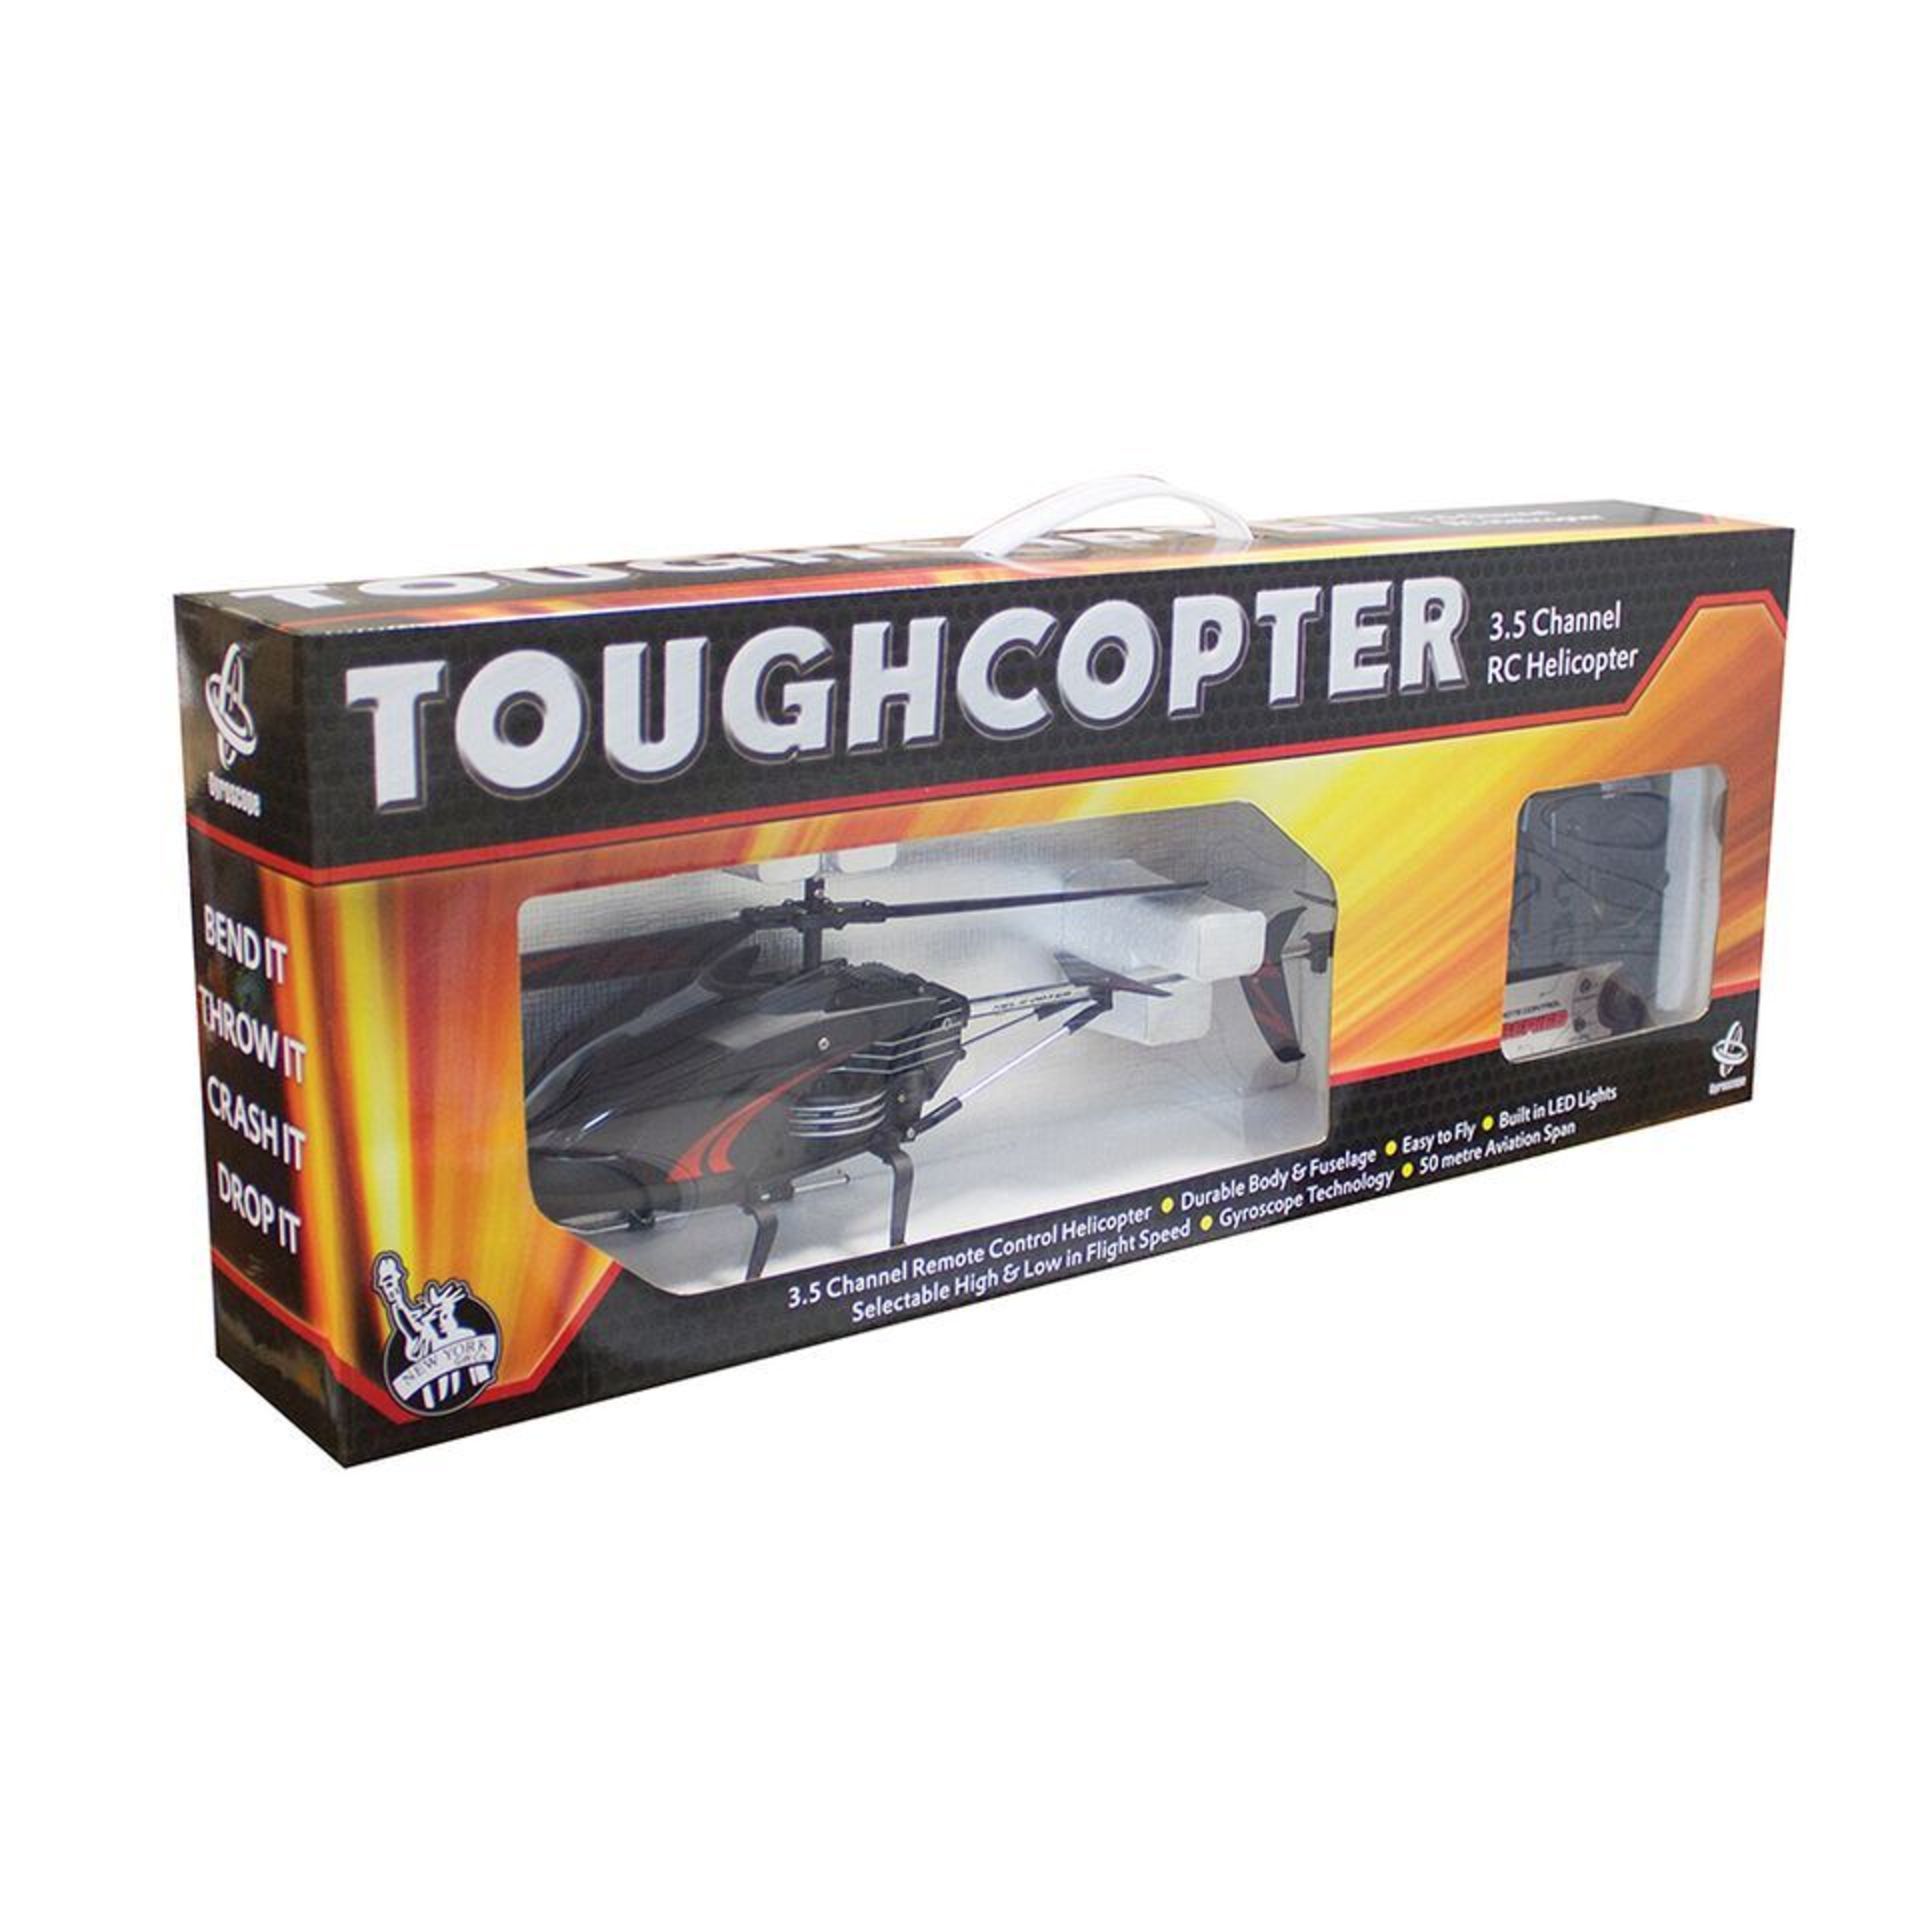 V Brand New Toughcopter 3.5 Channel R/C Helicopter With 3.0 Channel - Drable Body & Fuselage - LED - Image 2 of 2